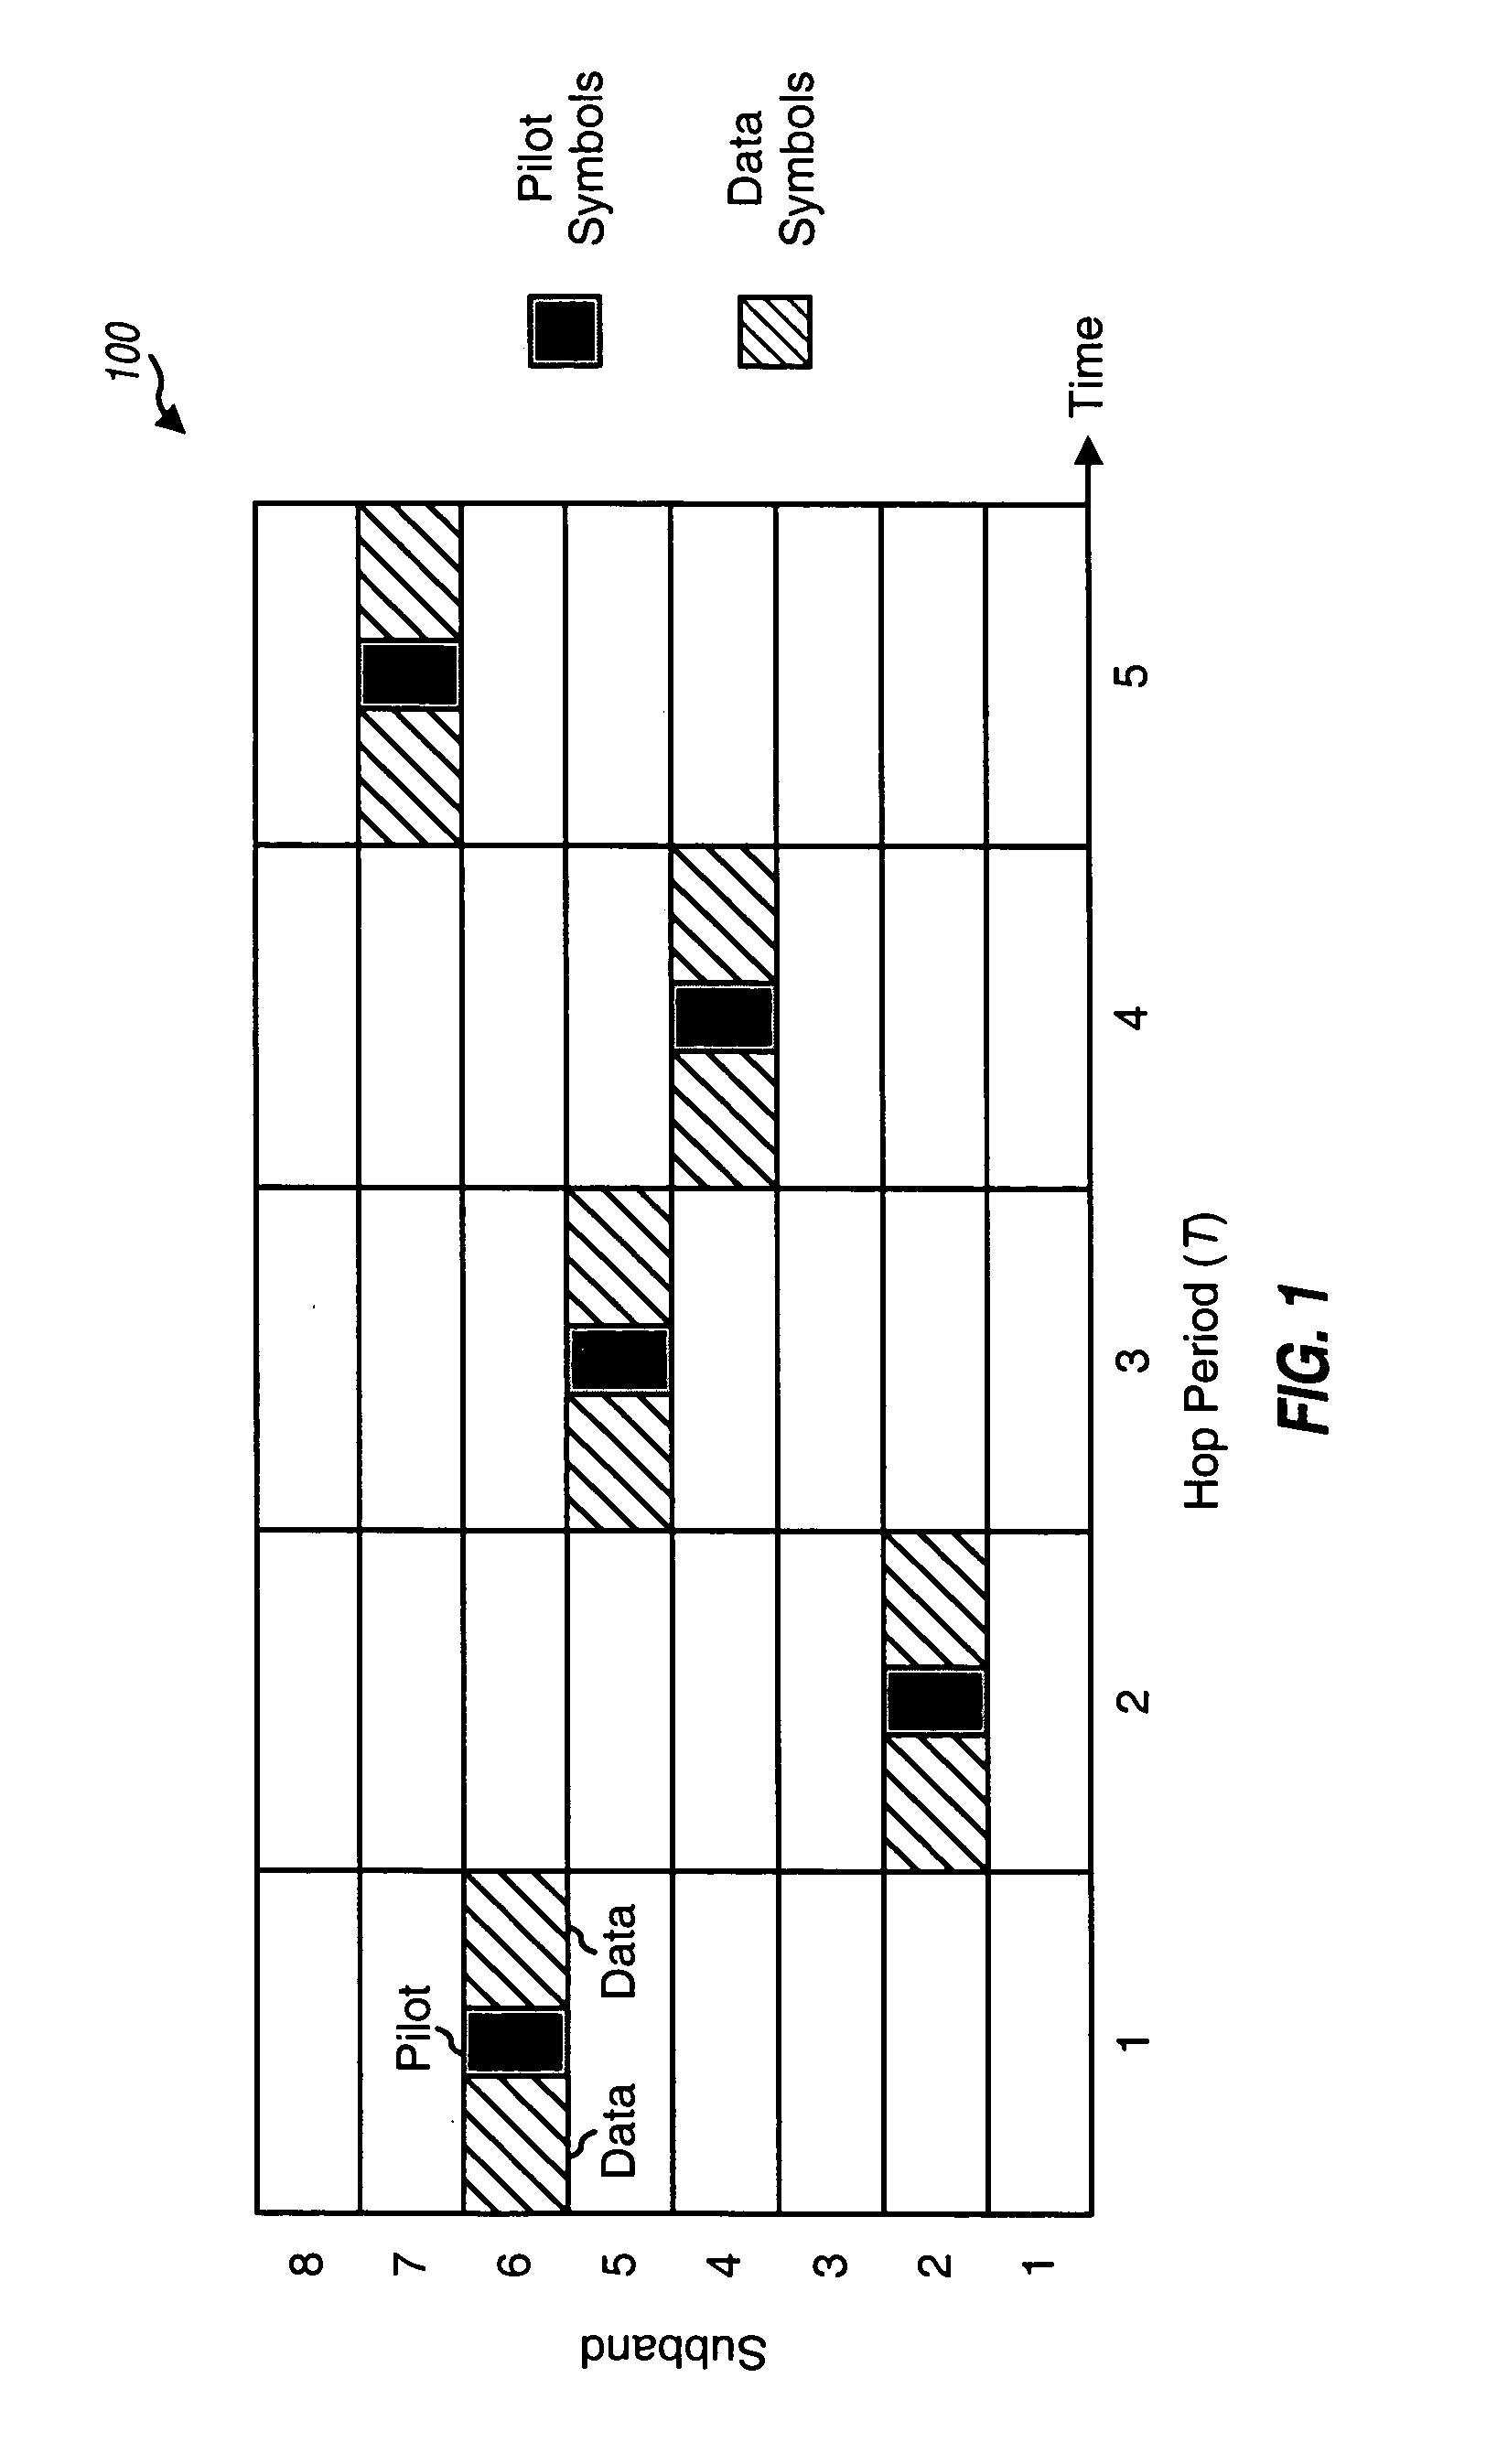 Fast frequency hopping with a code division multiplexed pilot in an OFDMA system